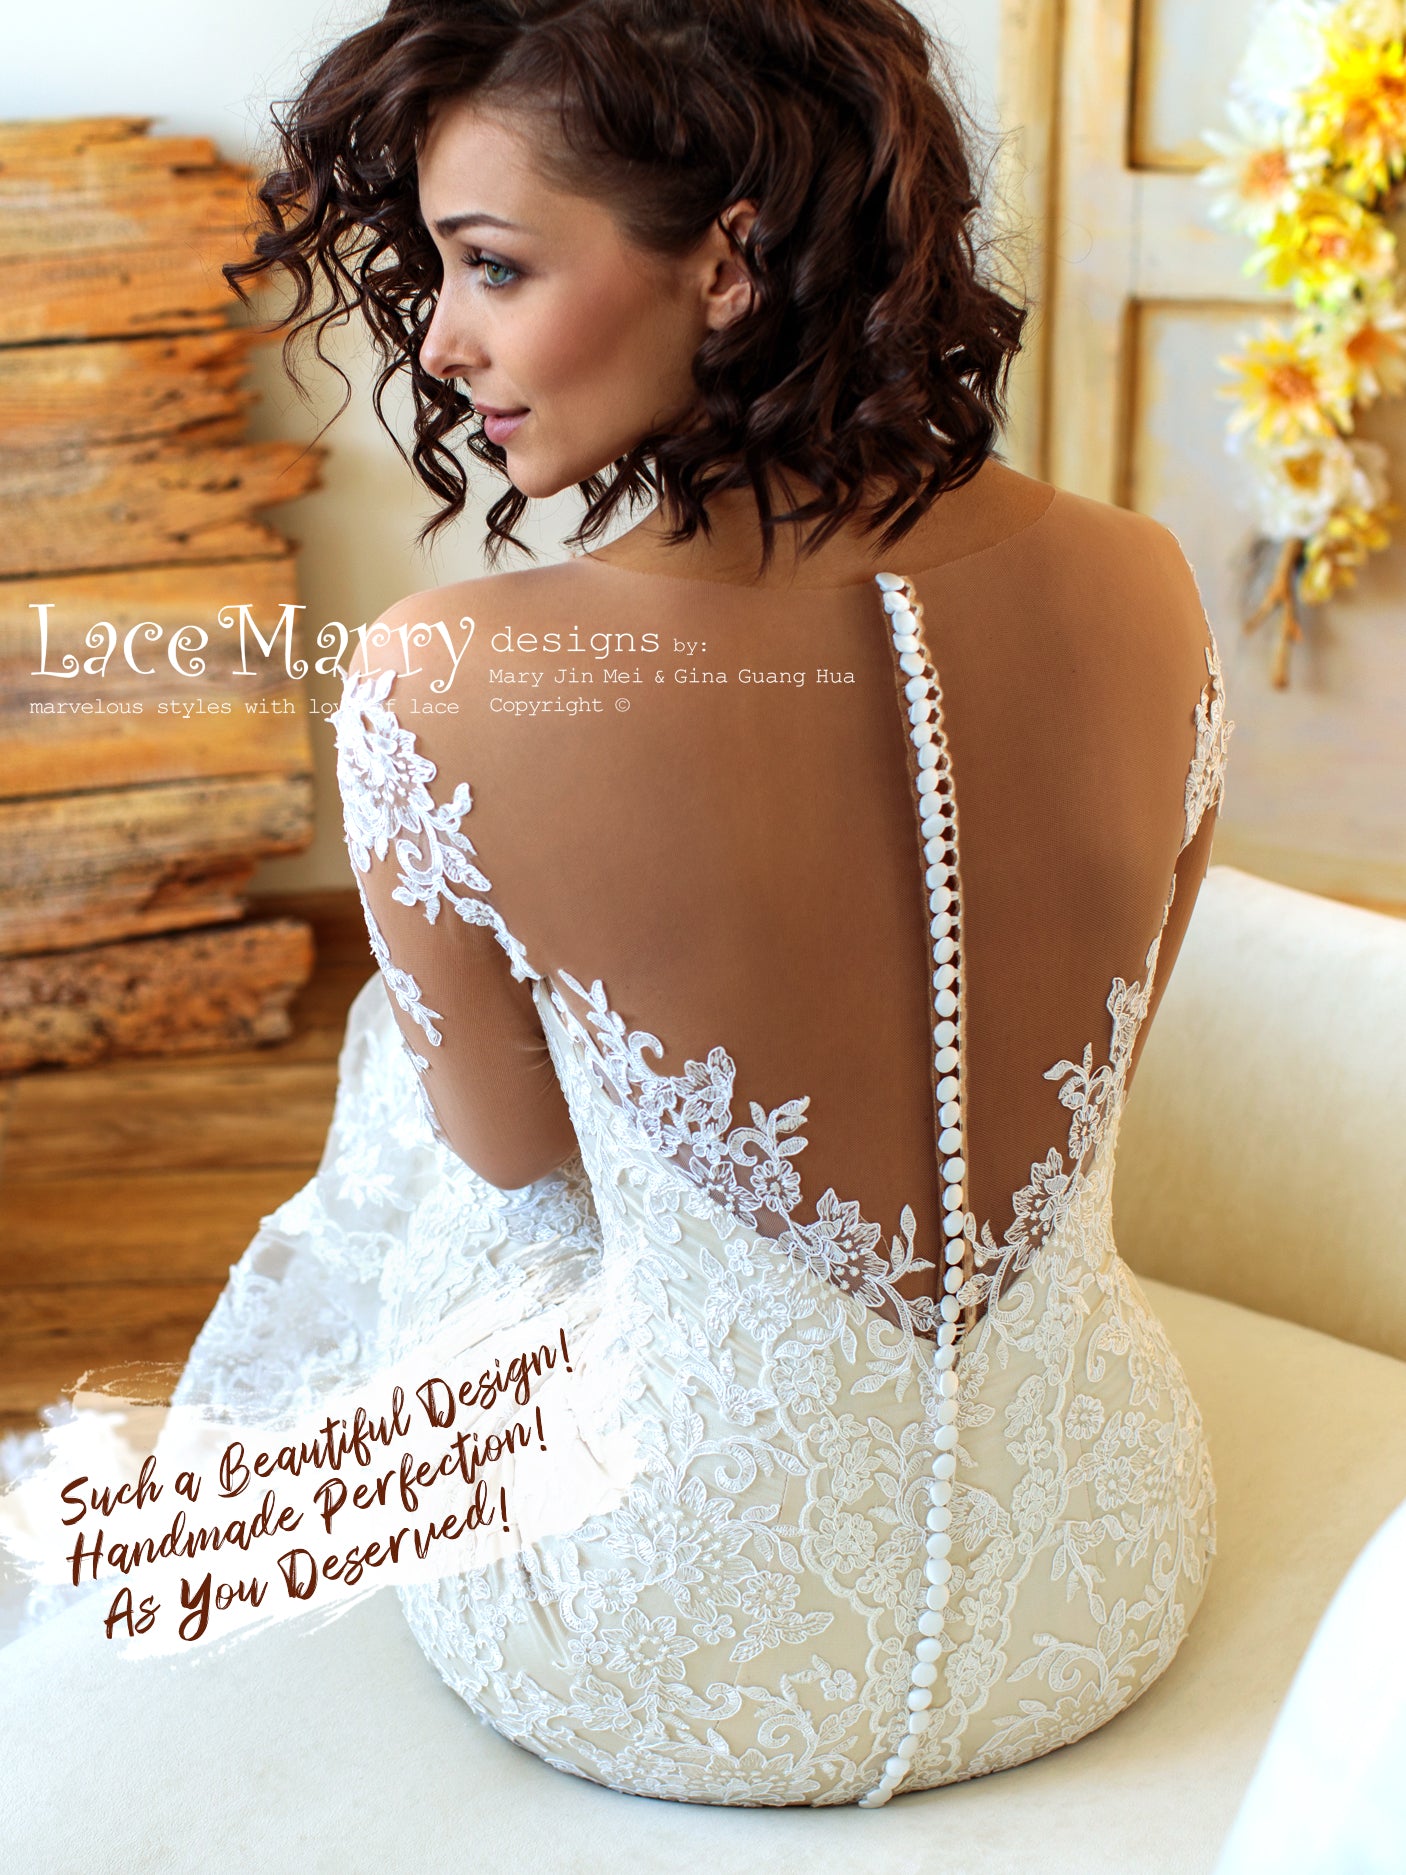 7 Stunning Ways to Accessorize Low Back or Backless Dresses with a Wed –  One Blushing Bride Custom Wedding Veils